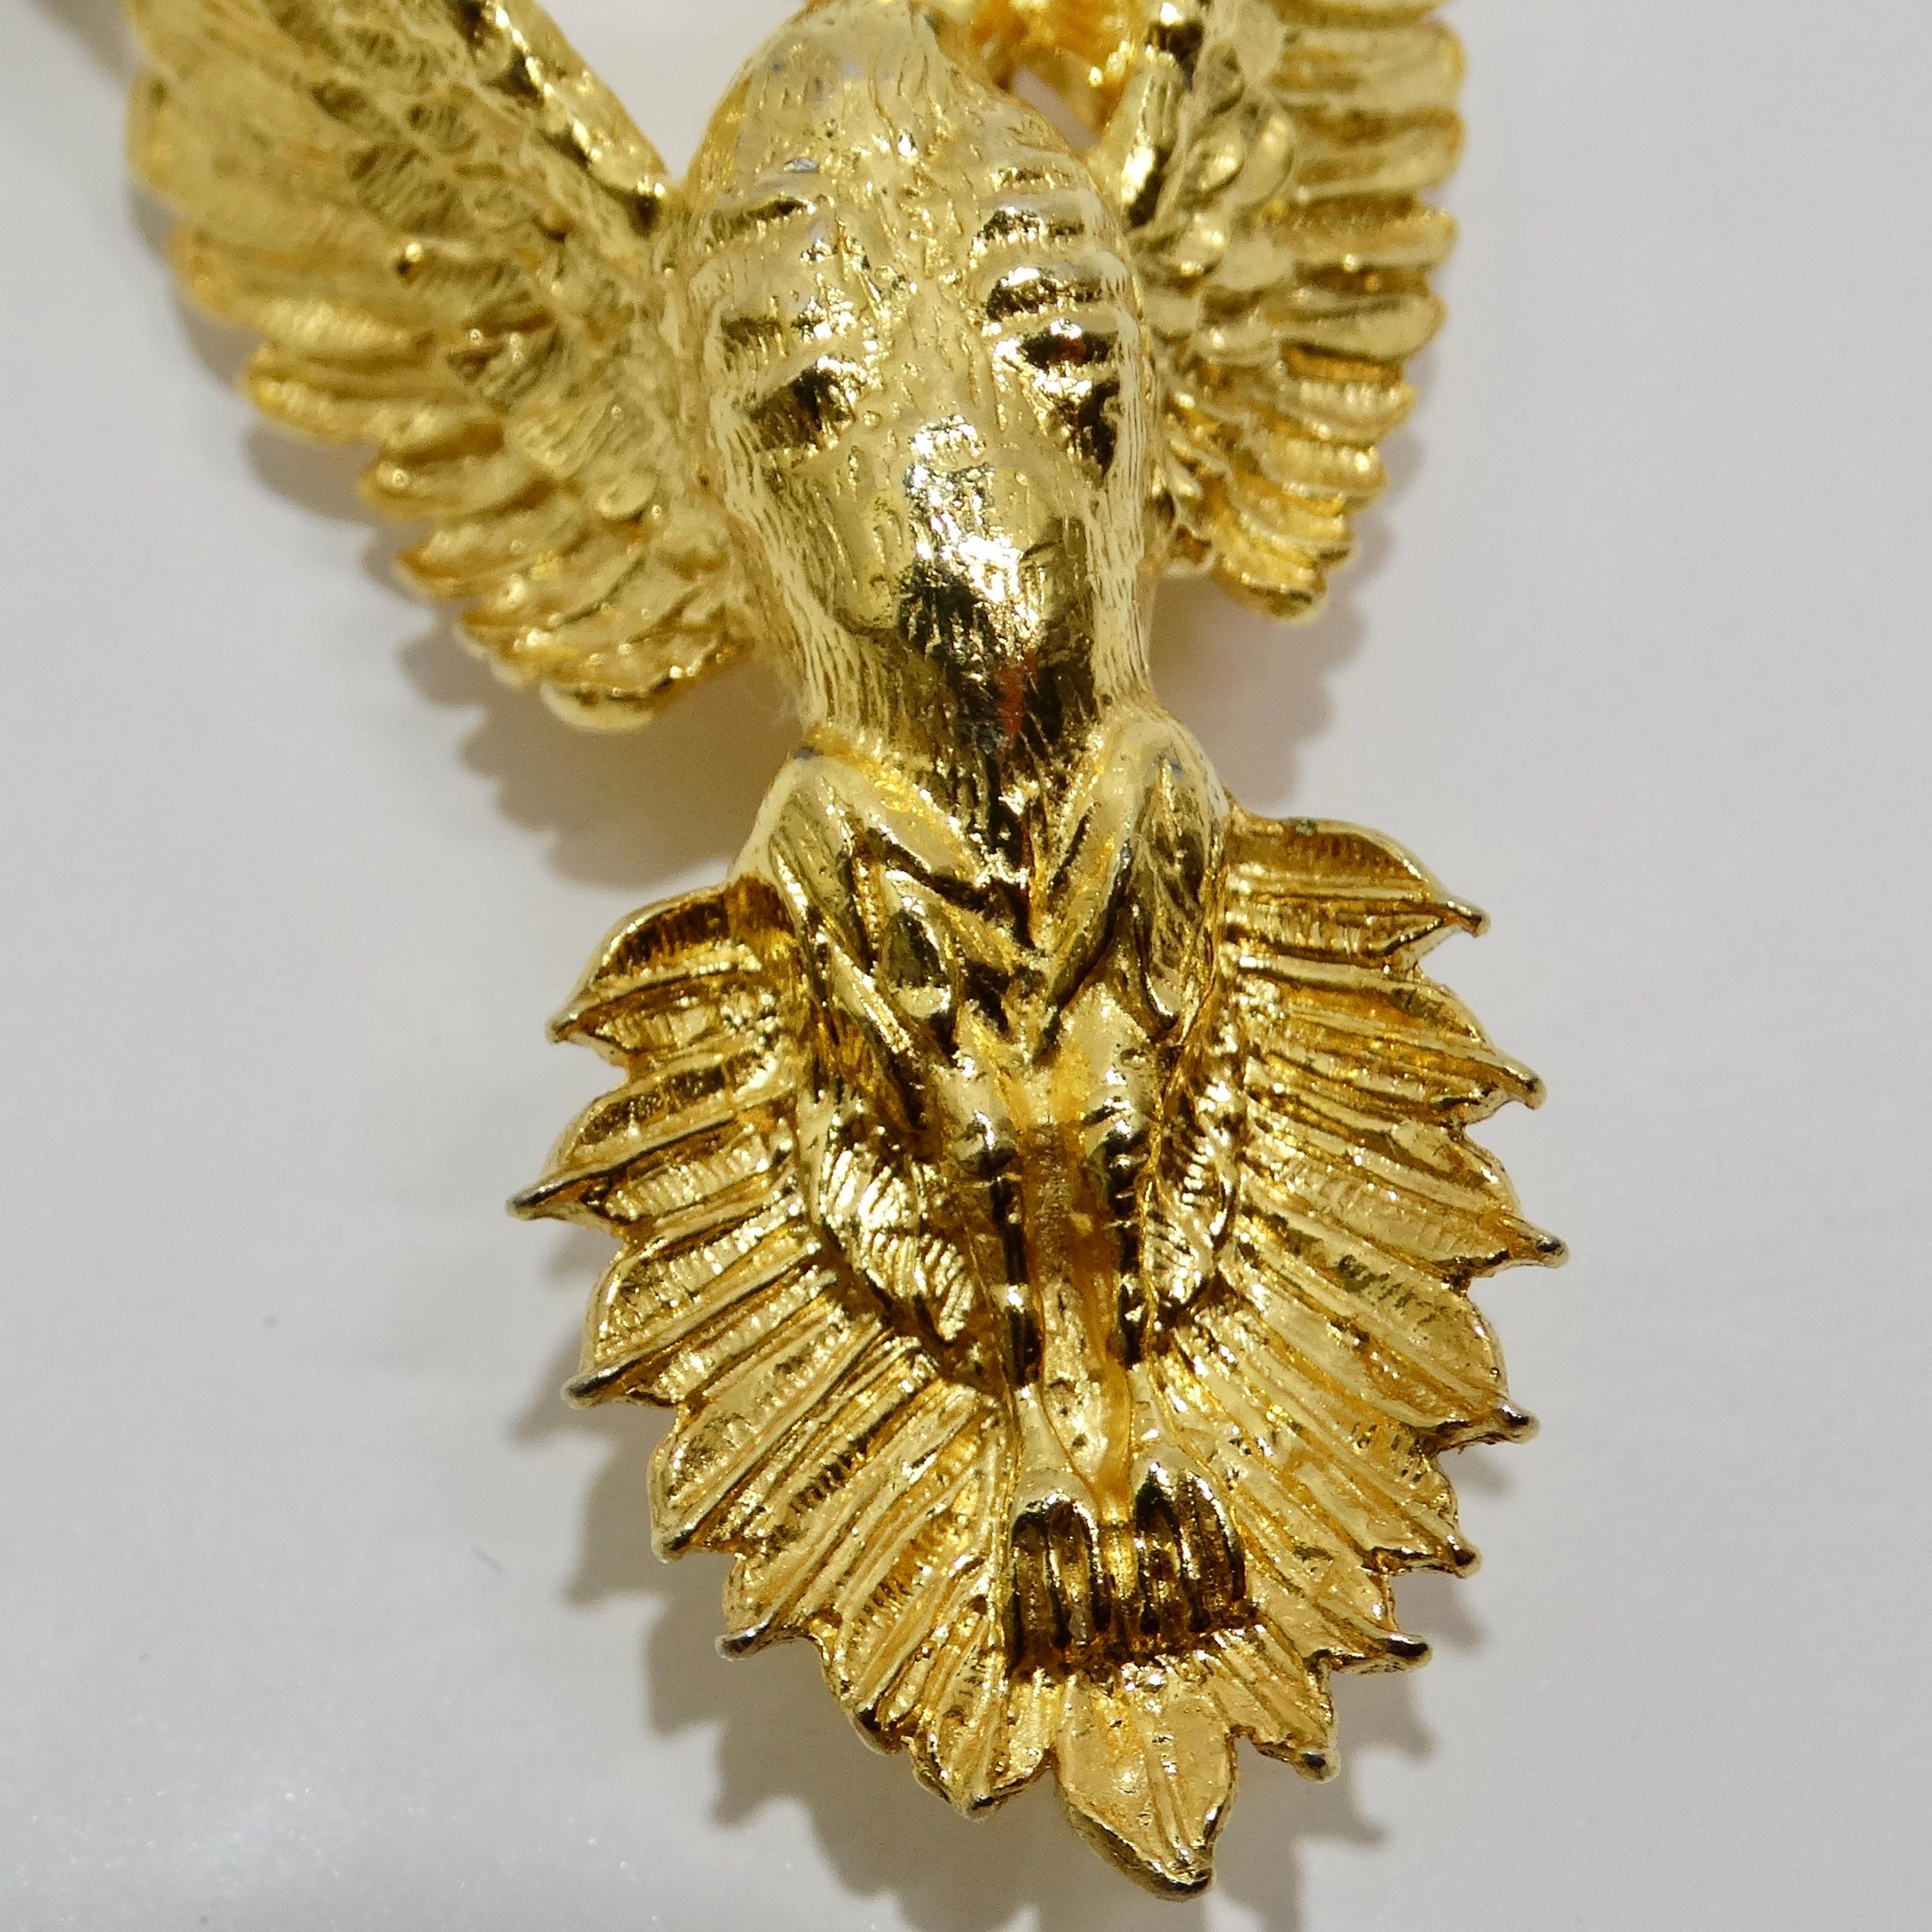 Introducing the 18K Gold Plated Vintage PhoenixBrooch, a stunning piece from the 1970s that combines luxury with a bold design. This remarkable brooch features an intricately crafted eagle, symbolizing strength and freedom. The 18K yellow gold